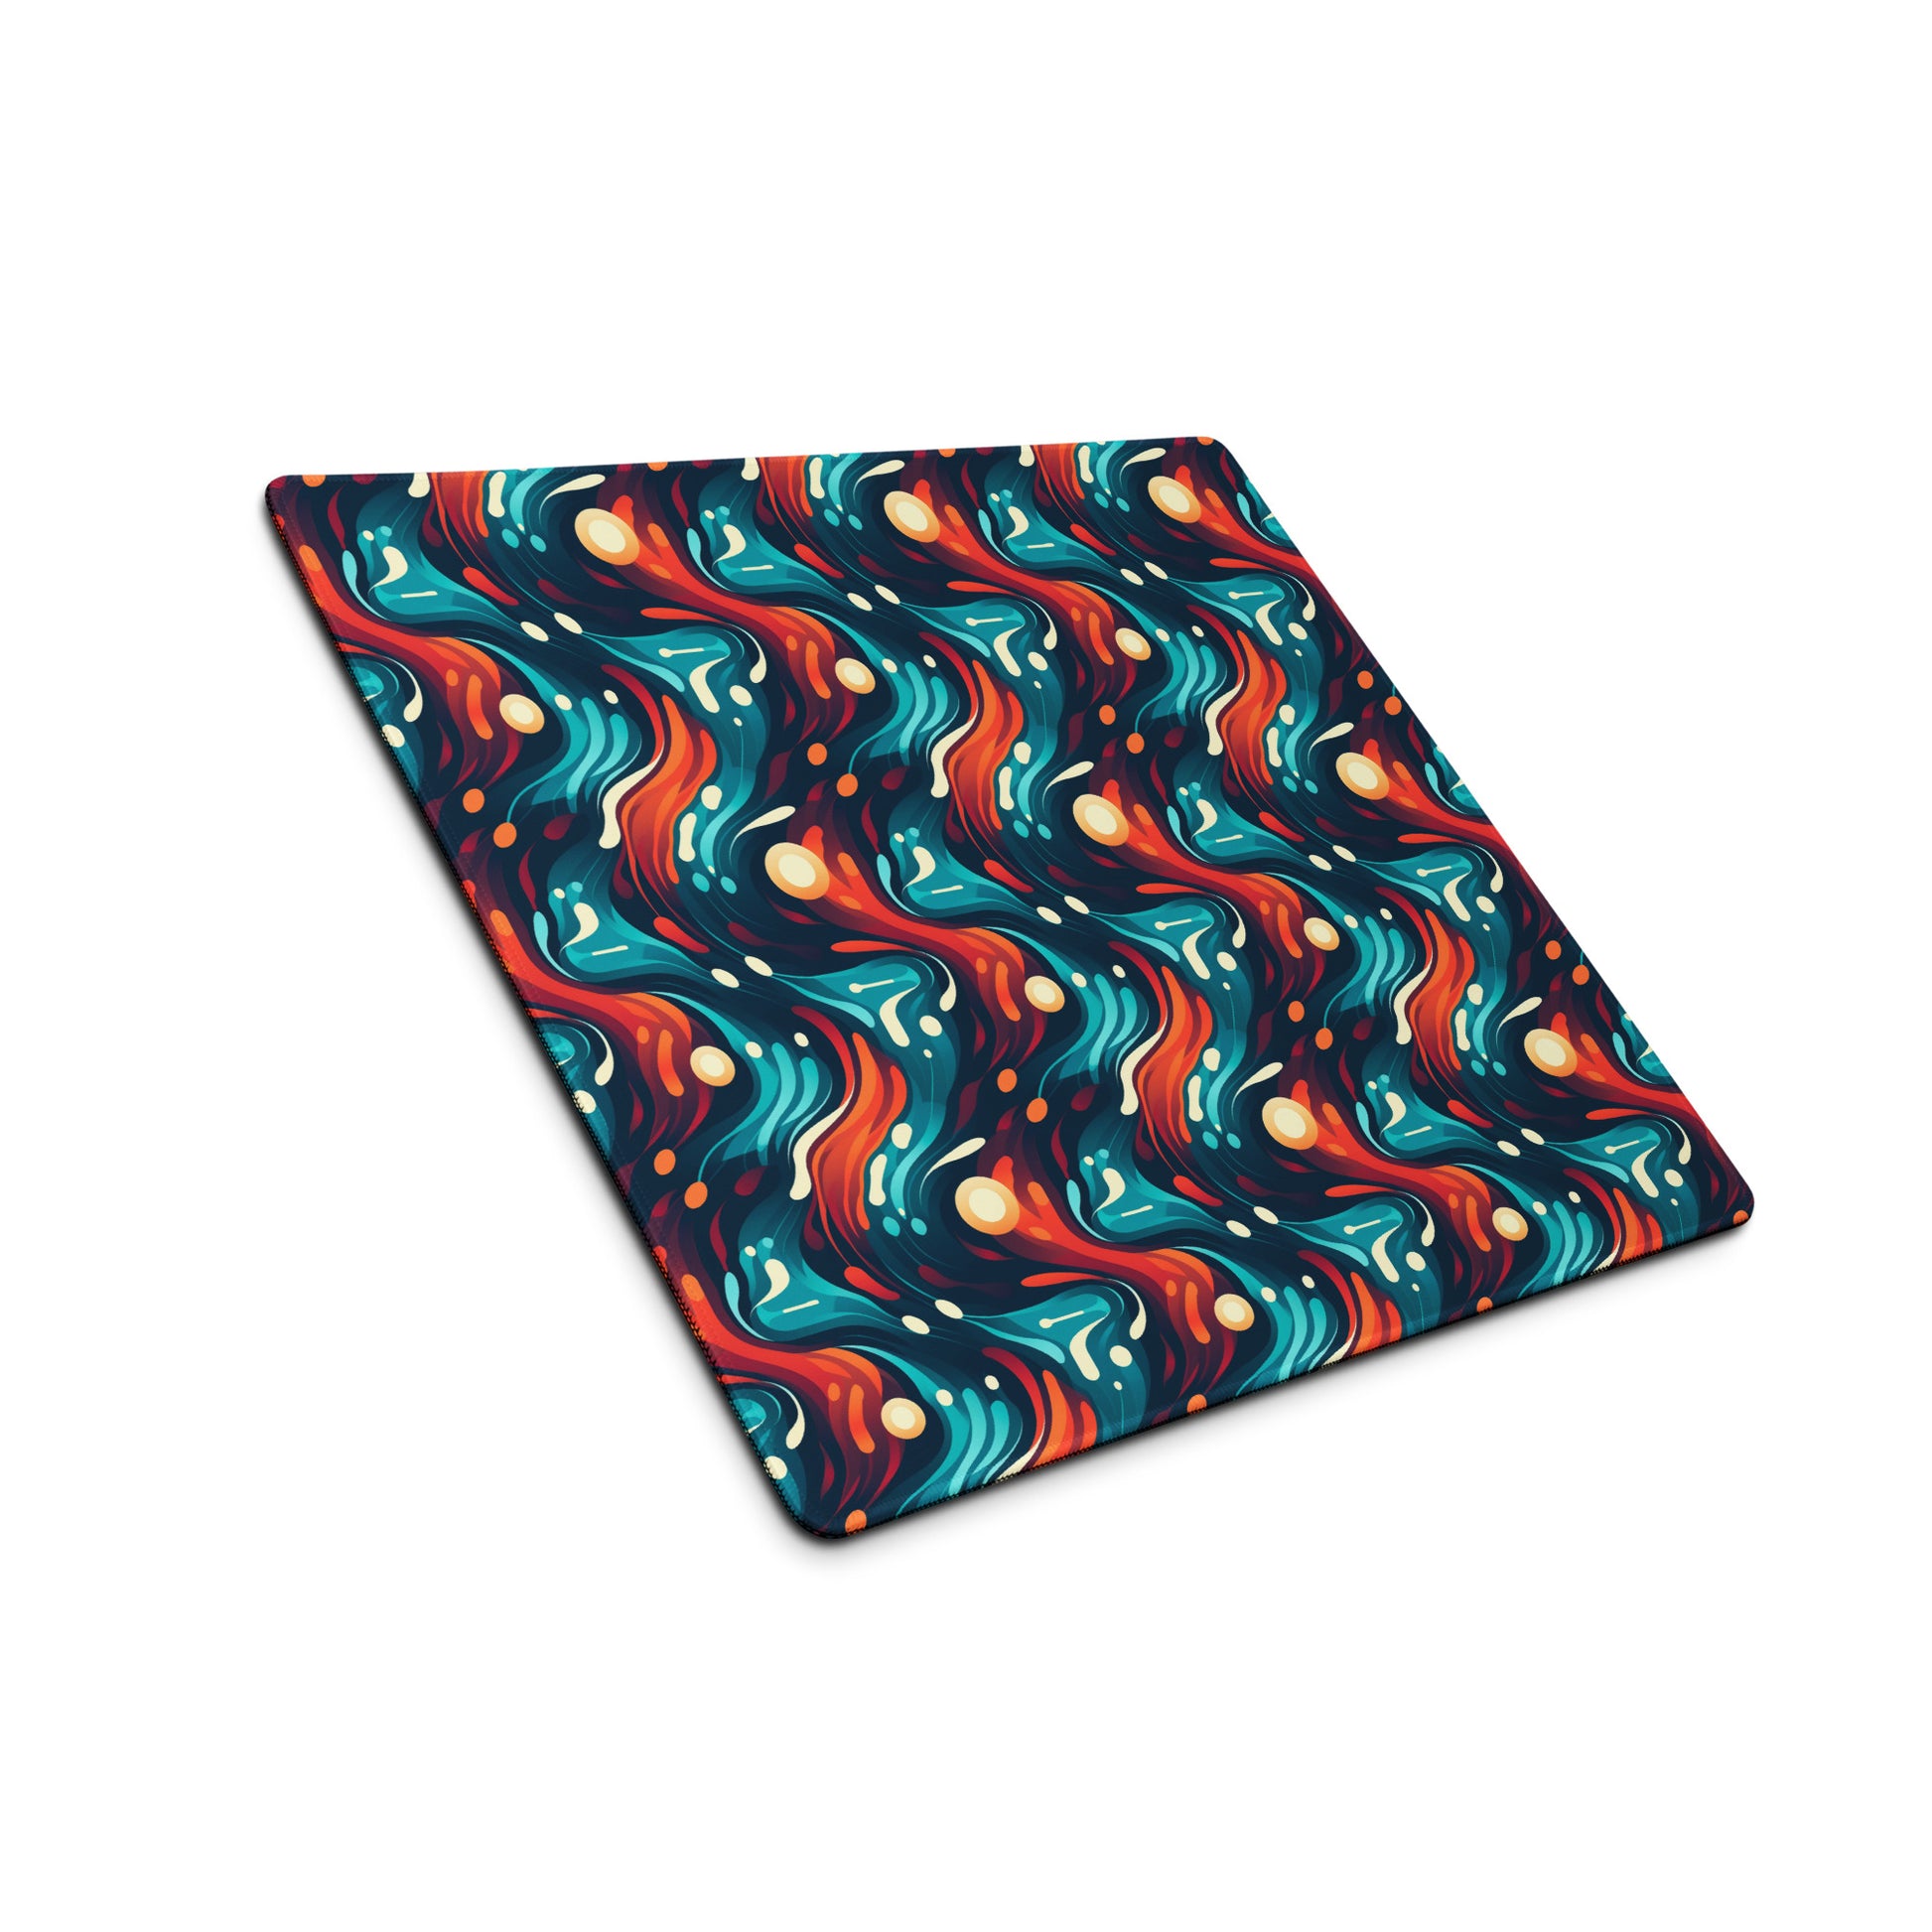 A 18" x 16" desk pad with a blue and orange wavy pattern sitting at an angle.